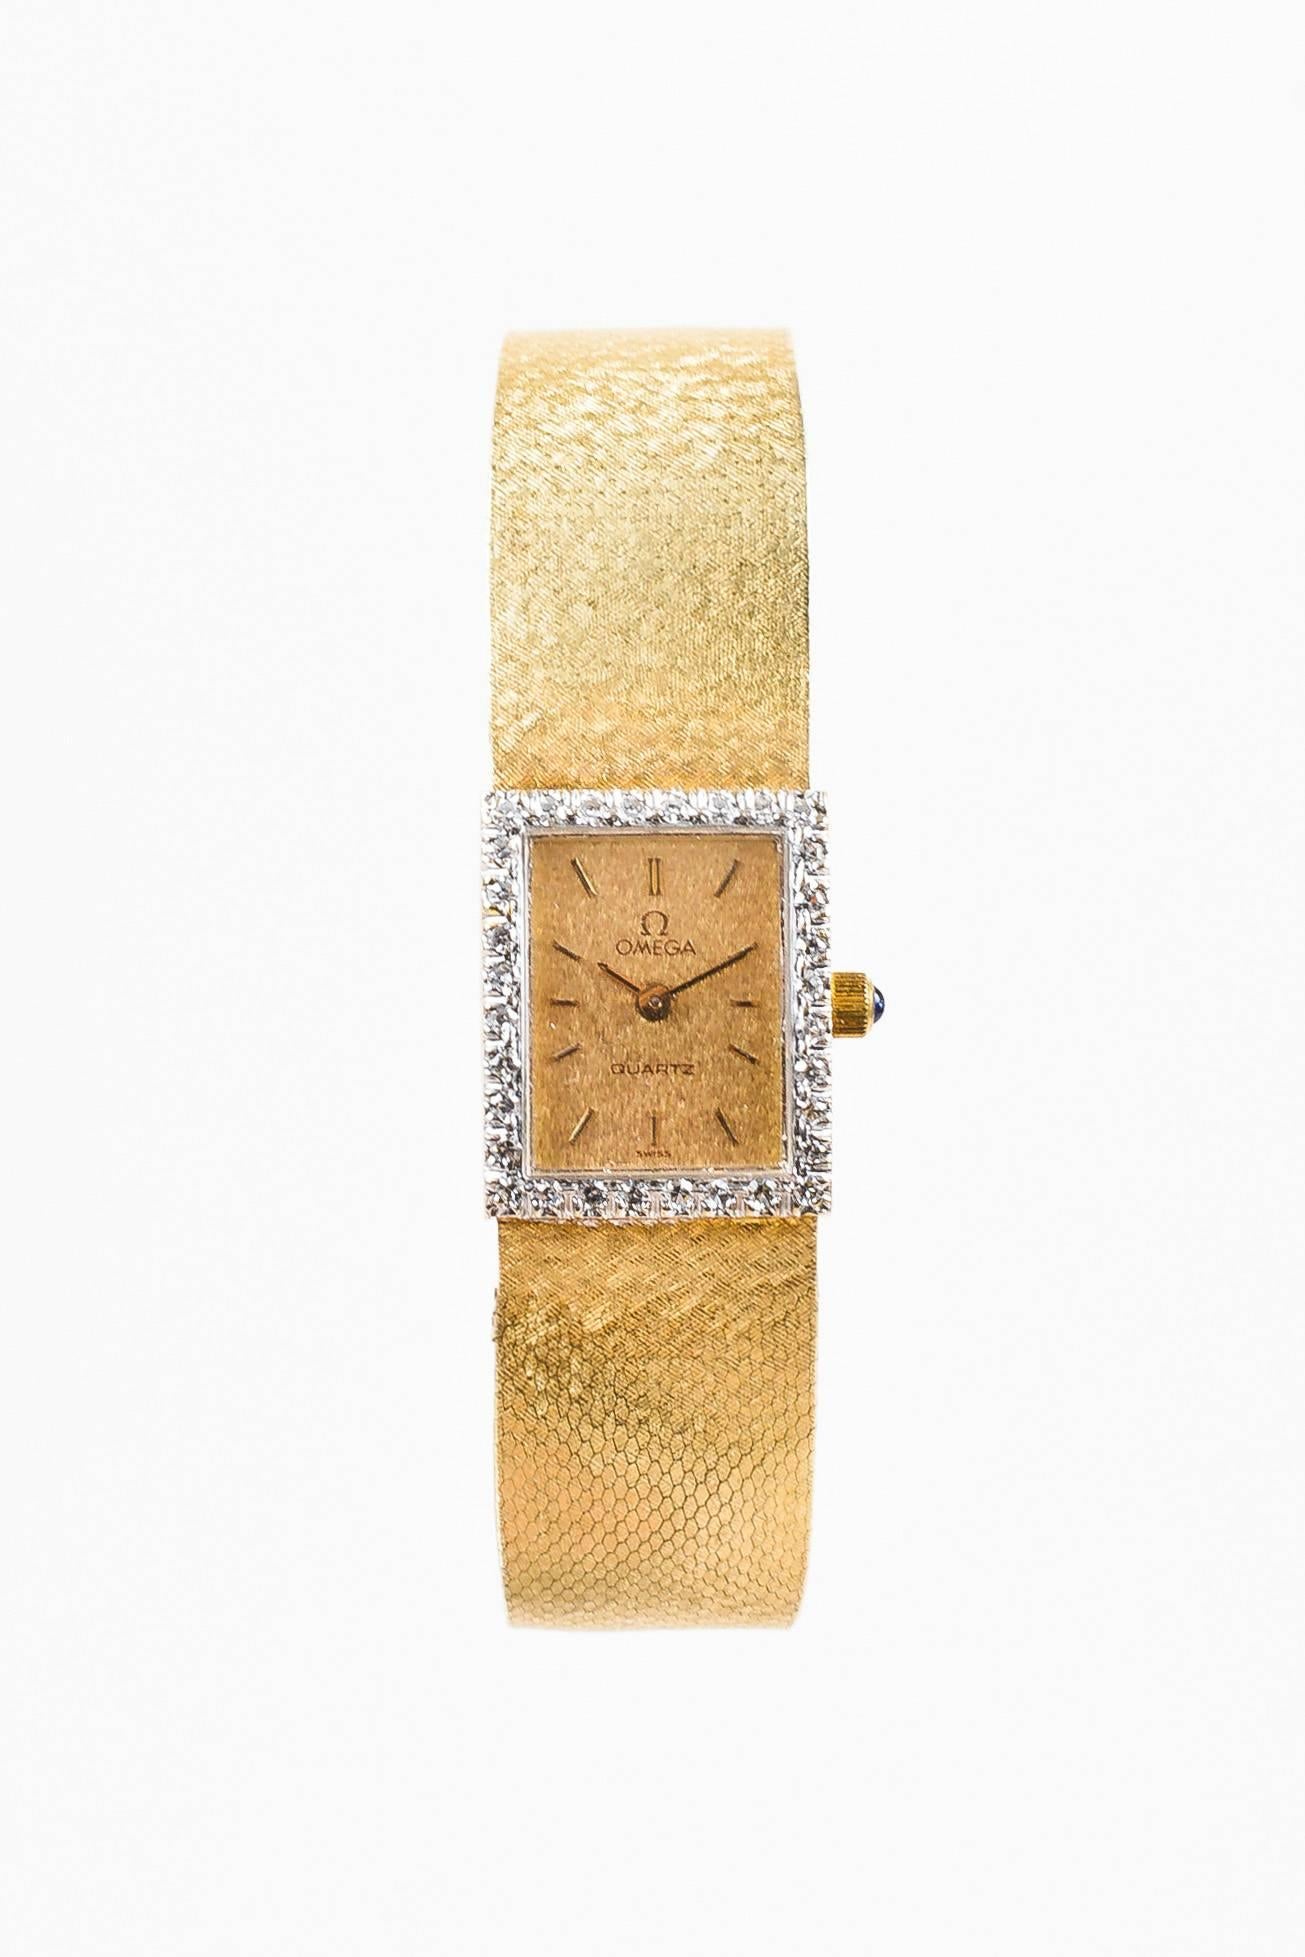 Fabric Content: 14K Yellow Gold, Diamond, Blue Spinel Cabochon

Item Specifics & Details: Retails at $3995. Elegant vintage watch features a 14k yellow gold band with two setting closure. Rectangular case is detailed with a row of diamonds